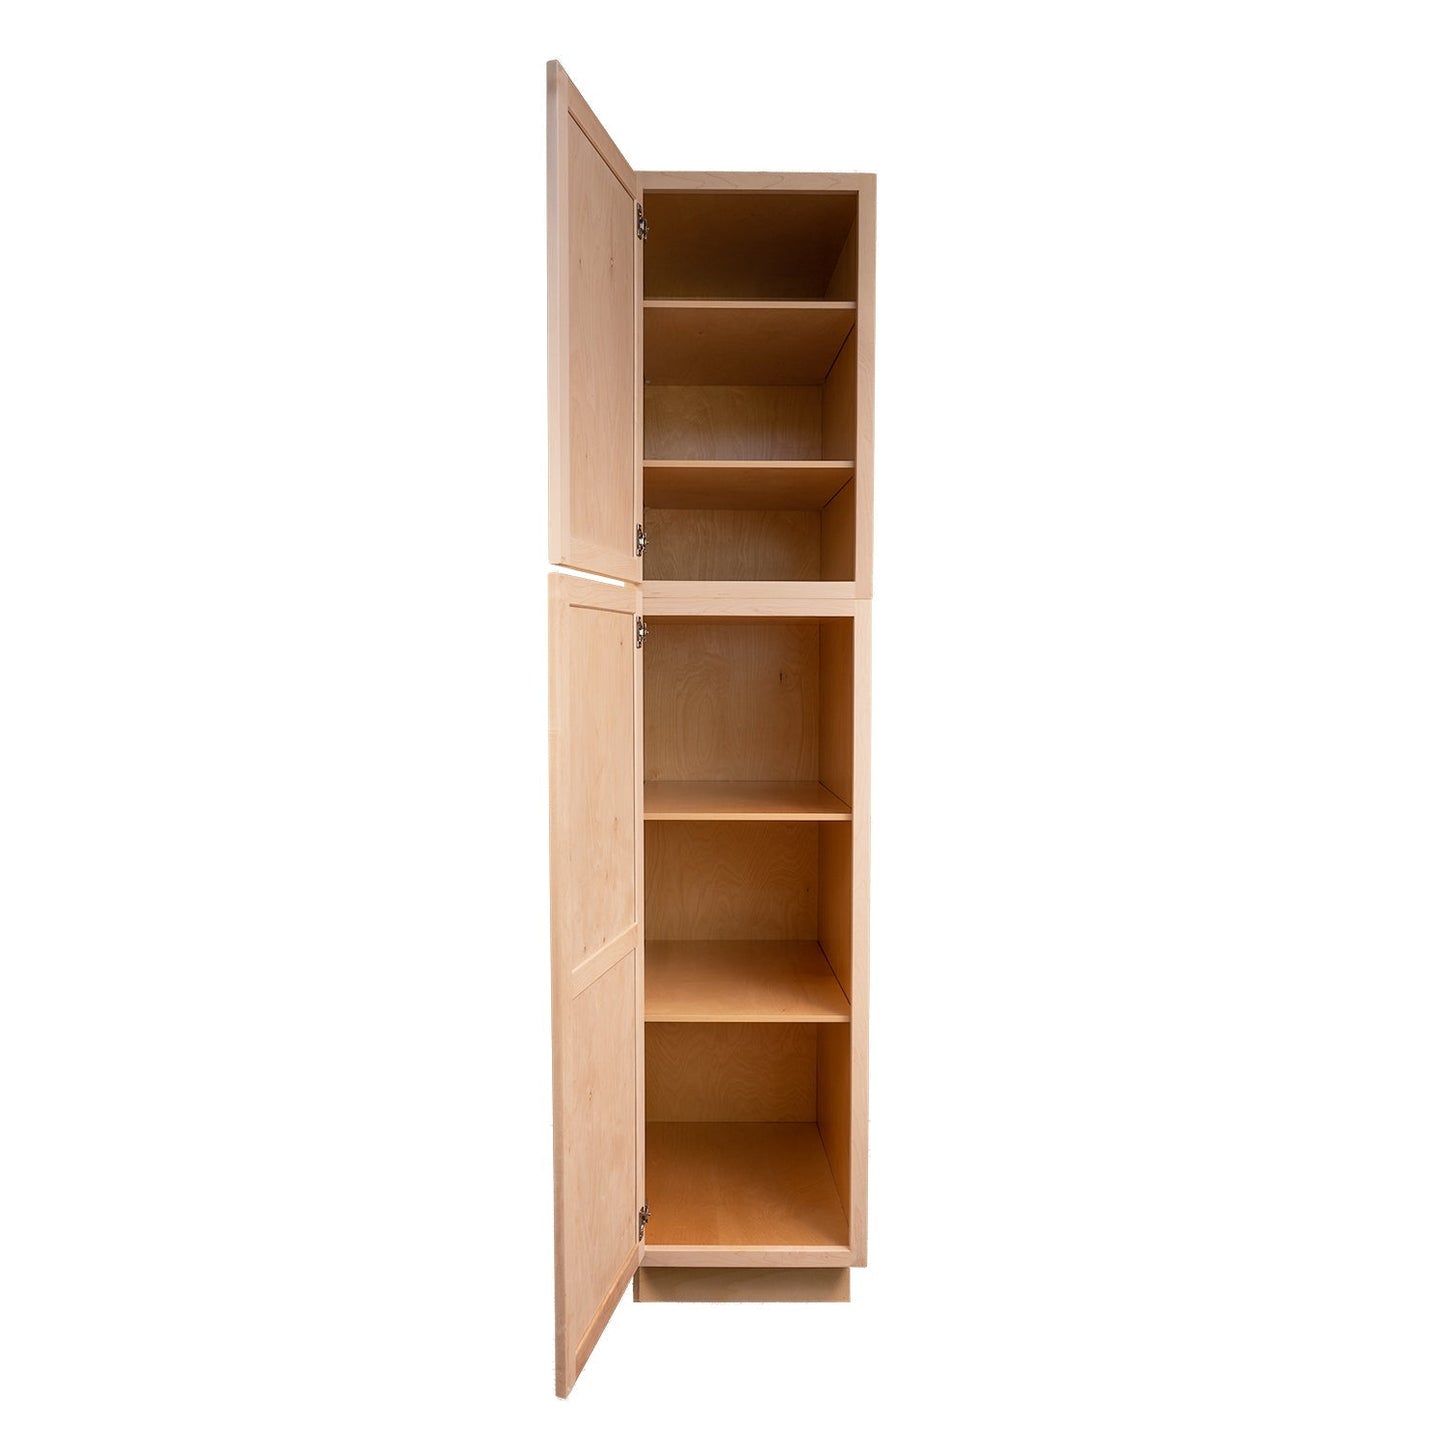 Quicklock RTA (Ready-to-Assemble) Raw Maple Pantry Cabinet 24"Wx90"Hx24"D